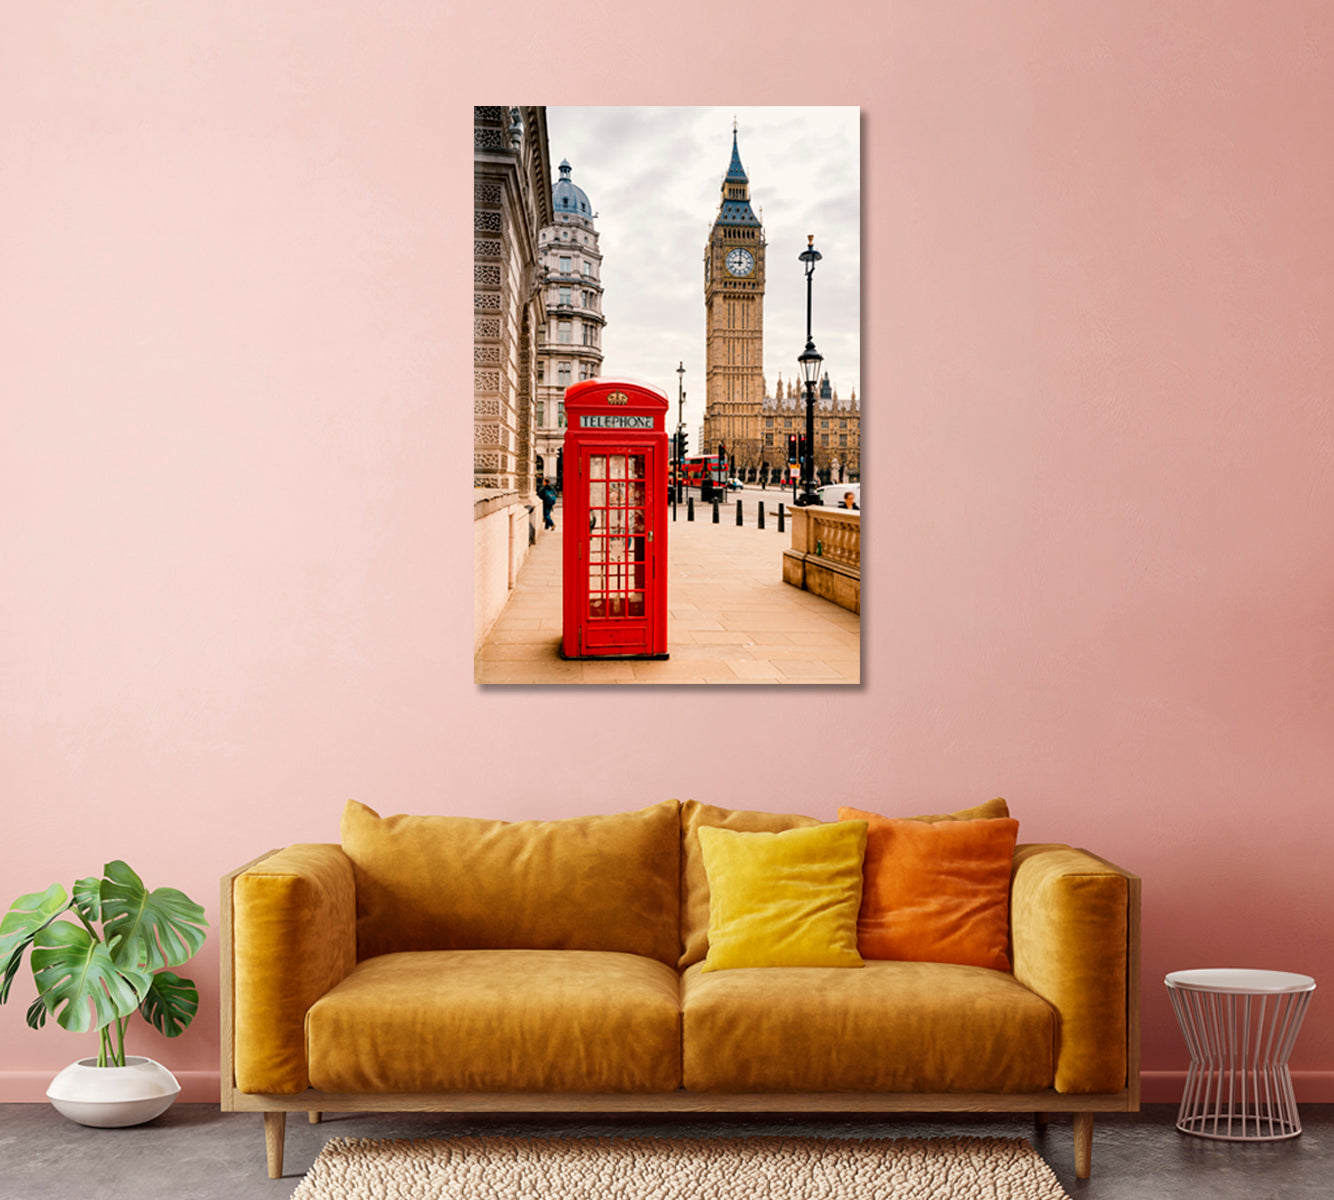 London Red Telephone Booth Wall Art-Canvas Print-CetArt-1 panel-16x24 inches-CetArt